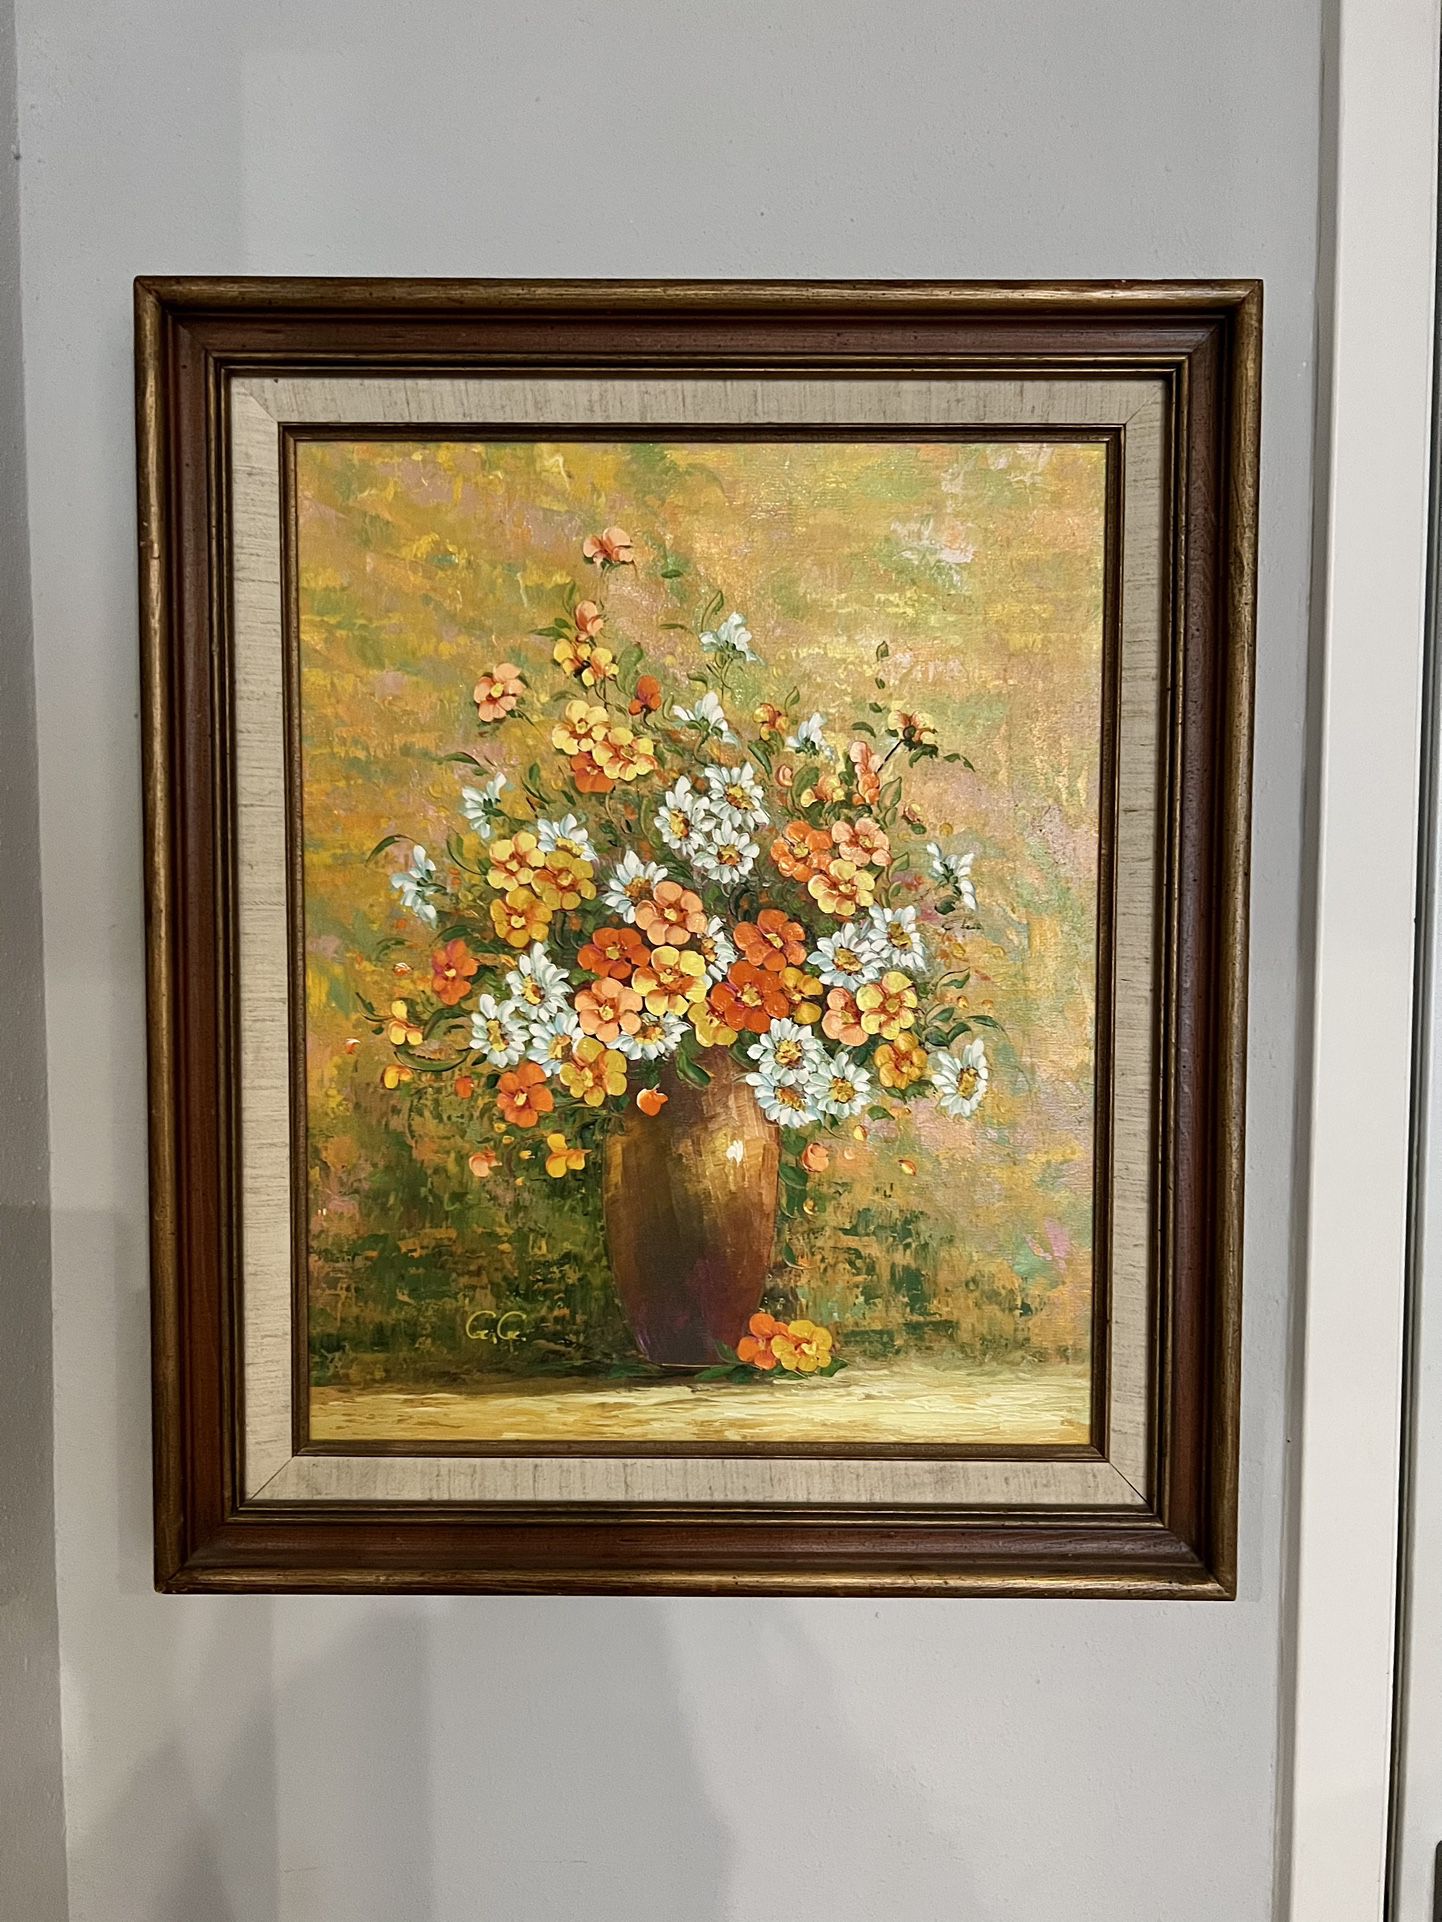 Large Vintage Floral Acrylic Painting. Framed Canvas Painting. Warm Colors MCM Mid Century Decor